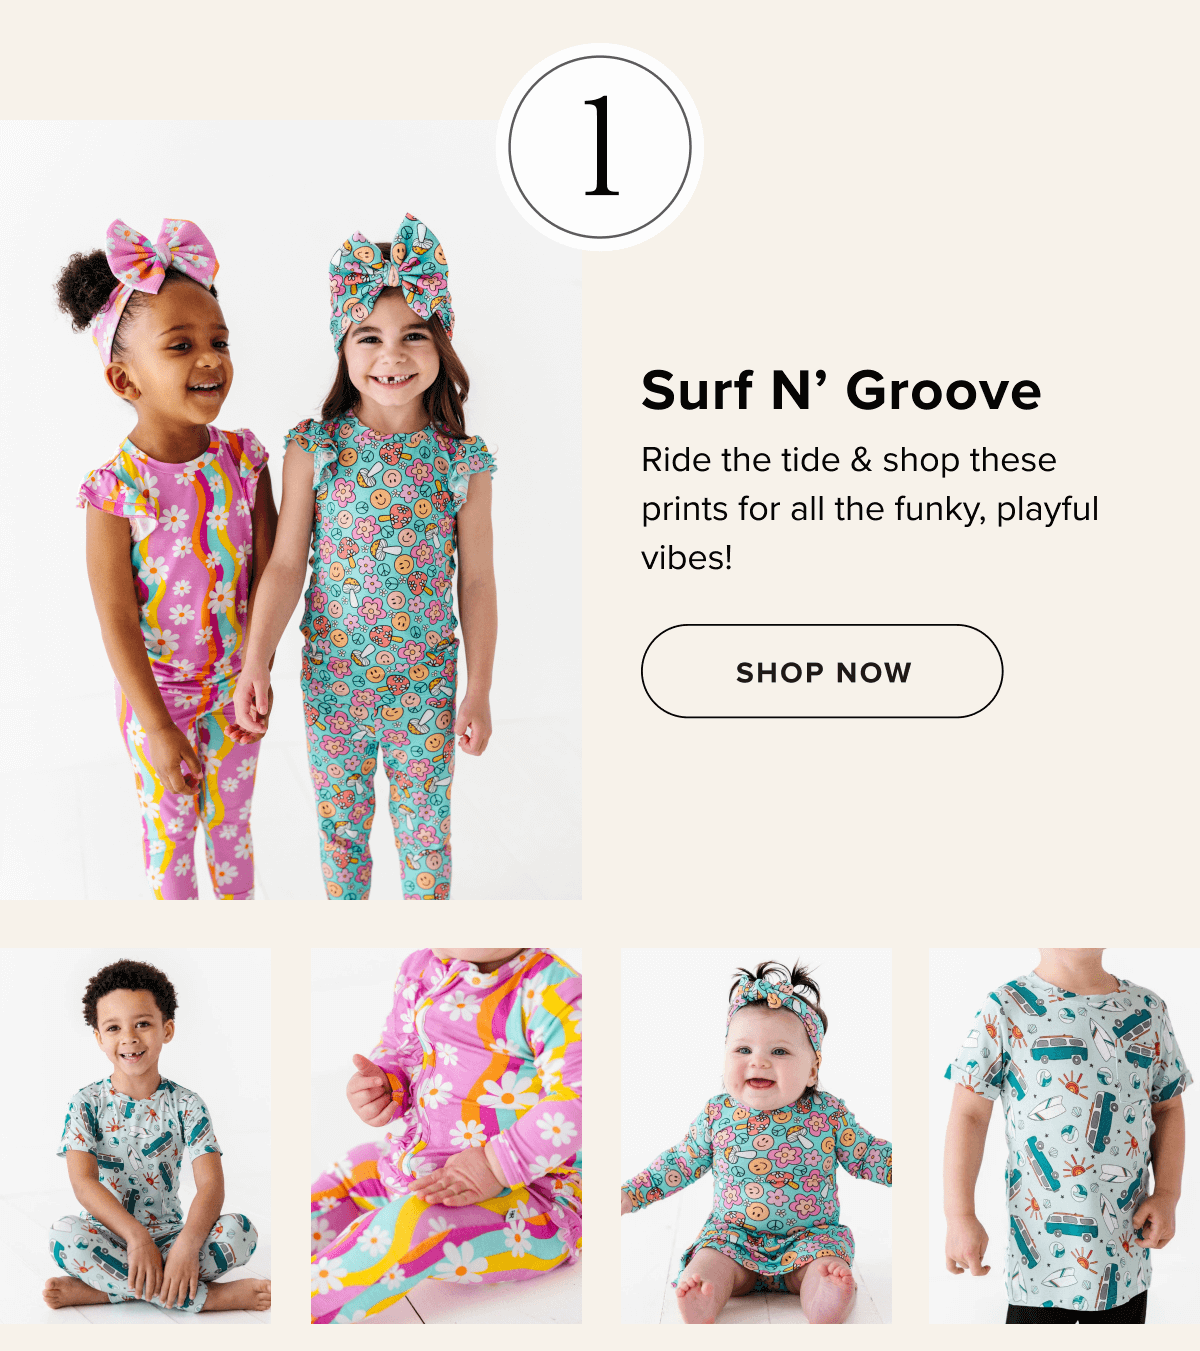 Surf N’ Groove Ride the tide & shop these prints for all the funky, playful vibes!